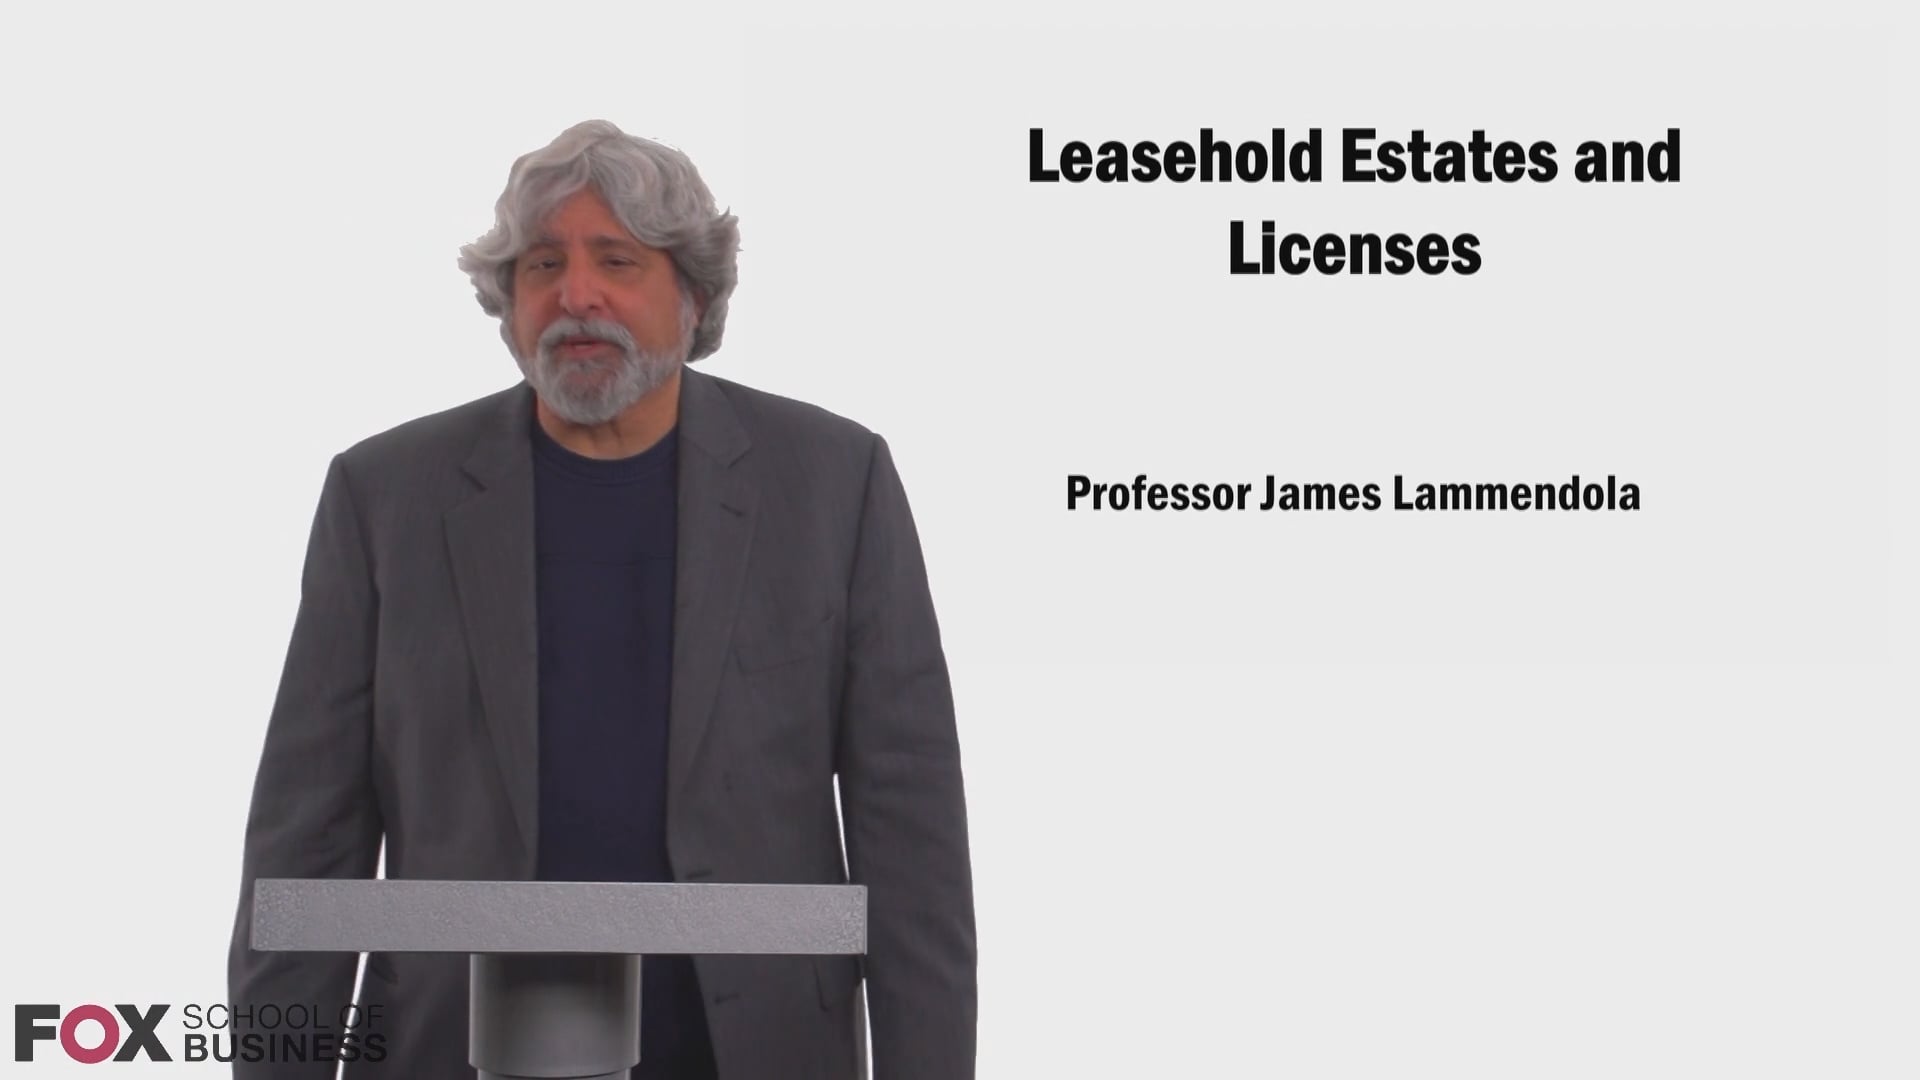 Leasehold Estates and Licenses